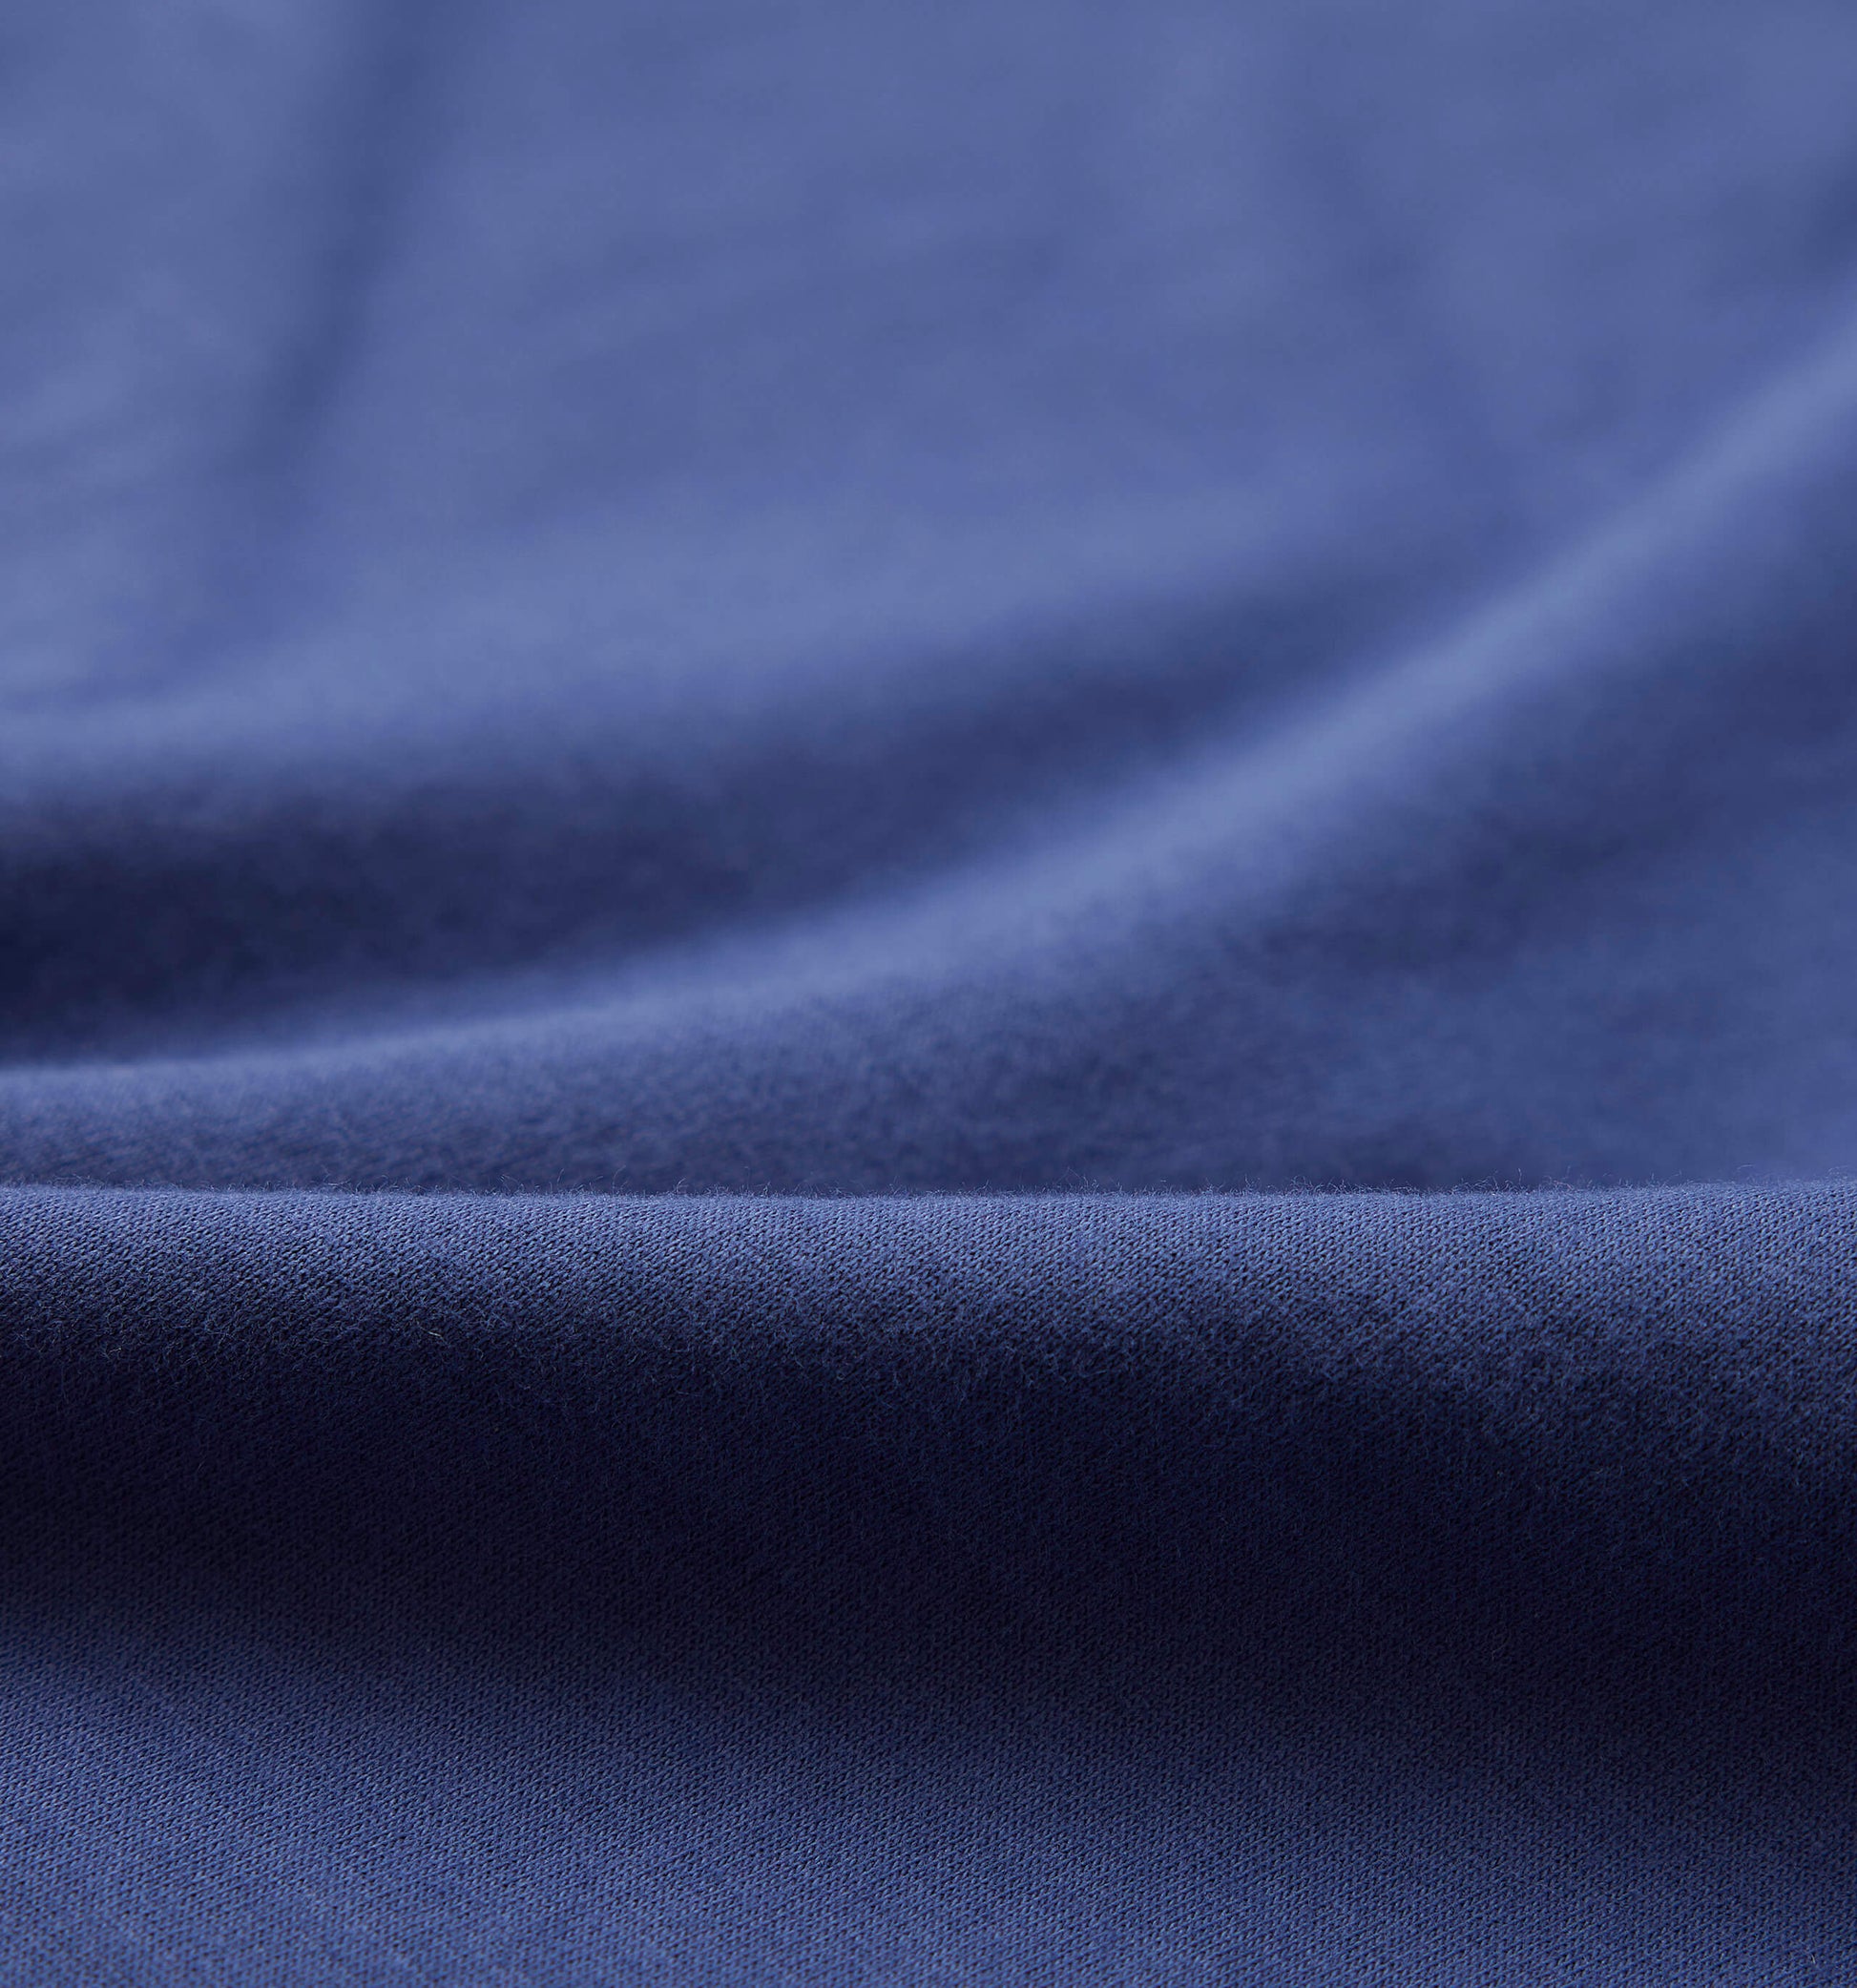 The James - Jersey Cotton Polo In Royal Blue From King Essentials